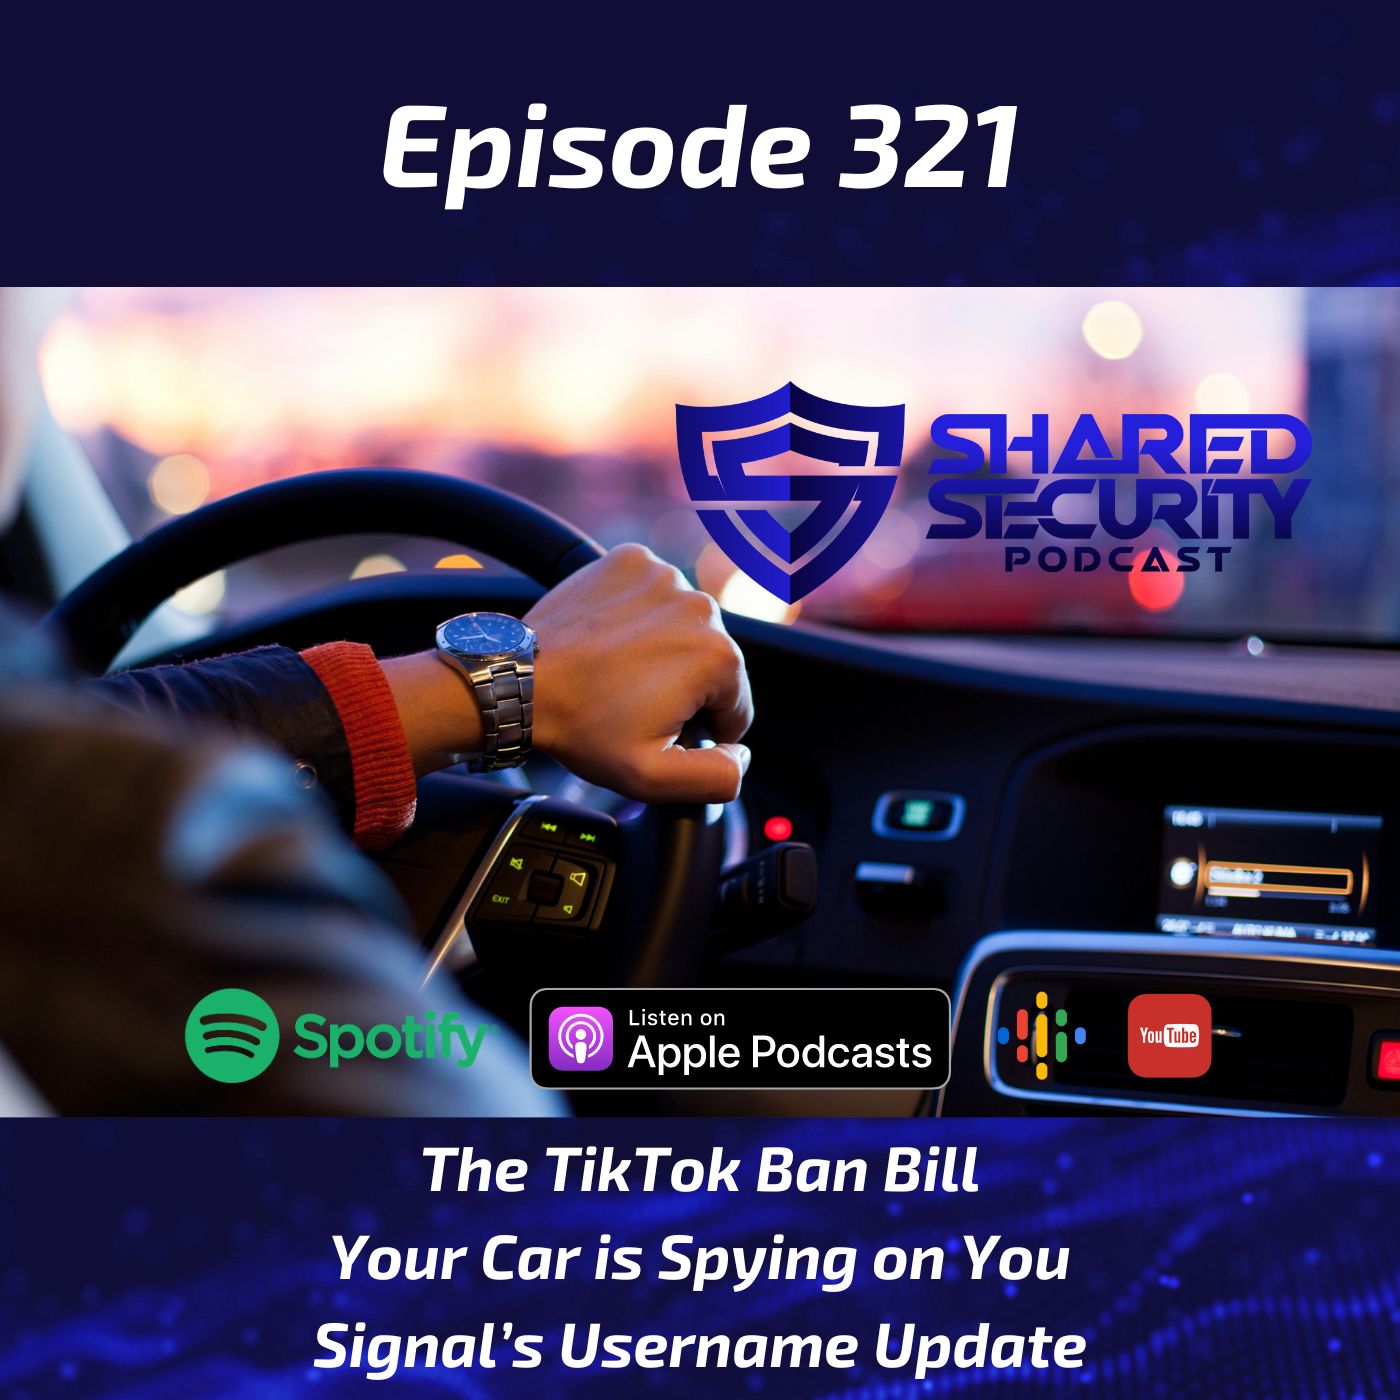 The TikTok Ban Bill, Your Car is Spying on You, Signal’s Username Update